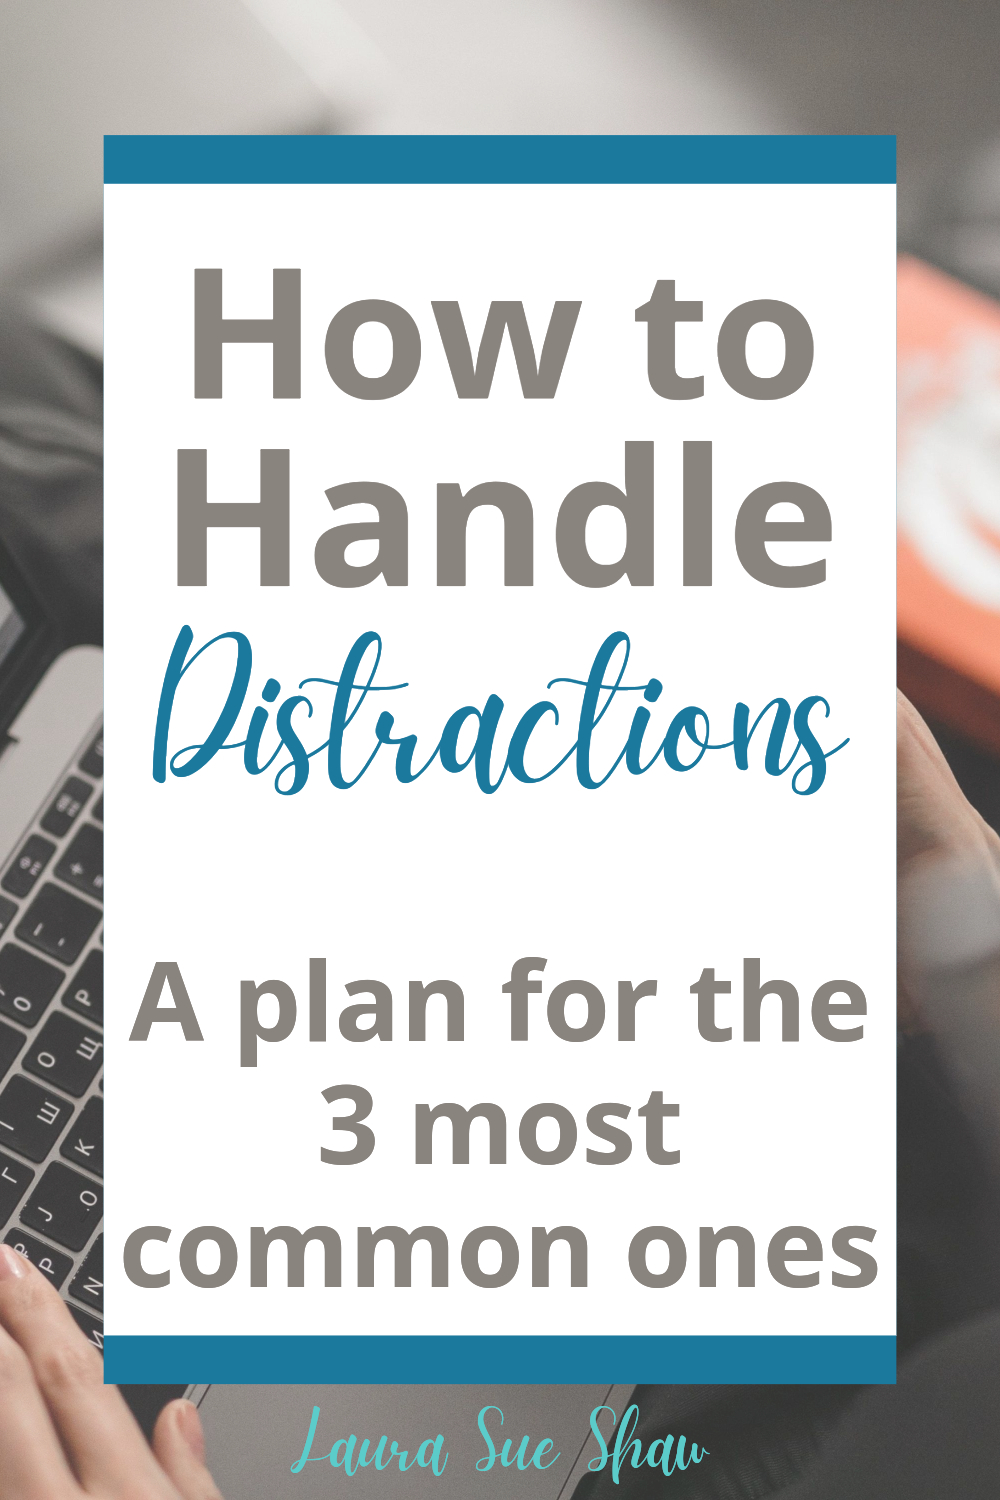 It's hard to focus these days - we get distracted all the time. So let's chat about how to handle distractions and the 3 most common ones.